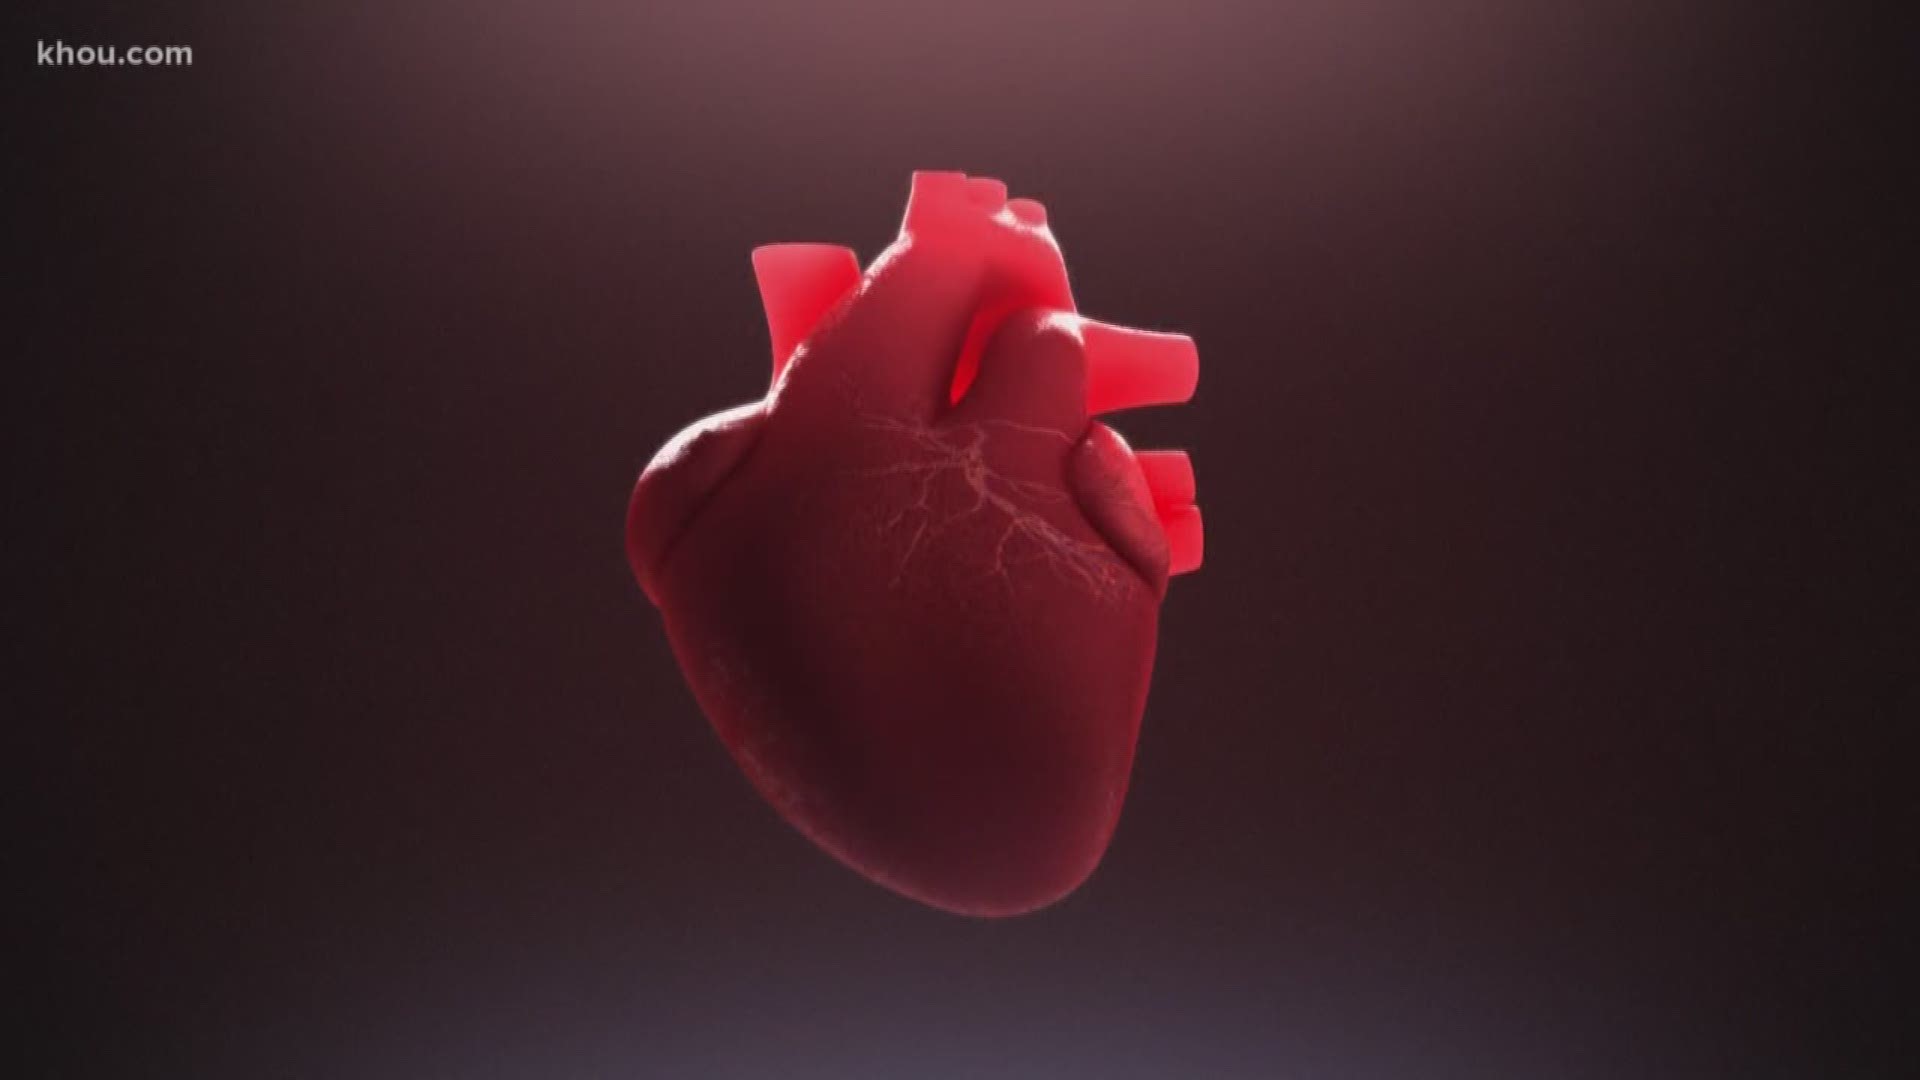 In our series Wear the Gown with UT Physicians, preventative cardiologist Dr. Patrick Kee has 10 things to keep in mind about your heart health.